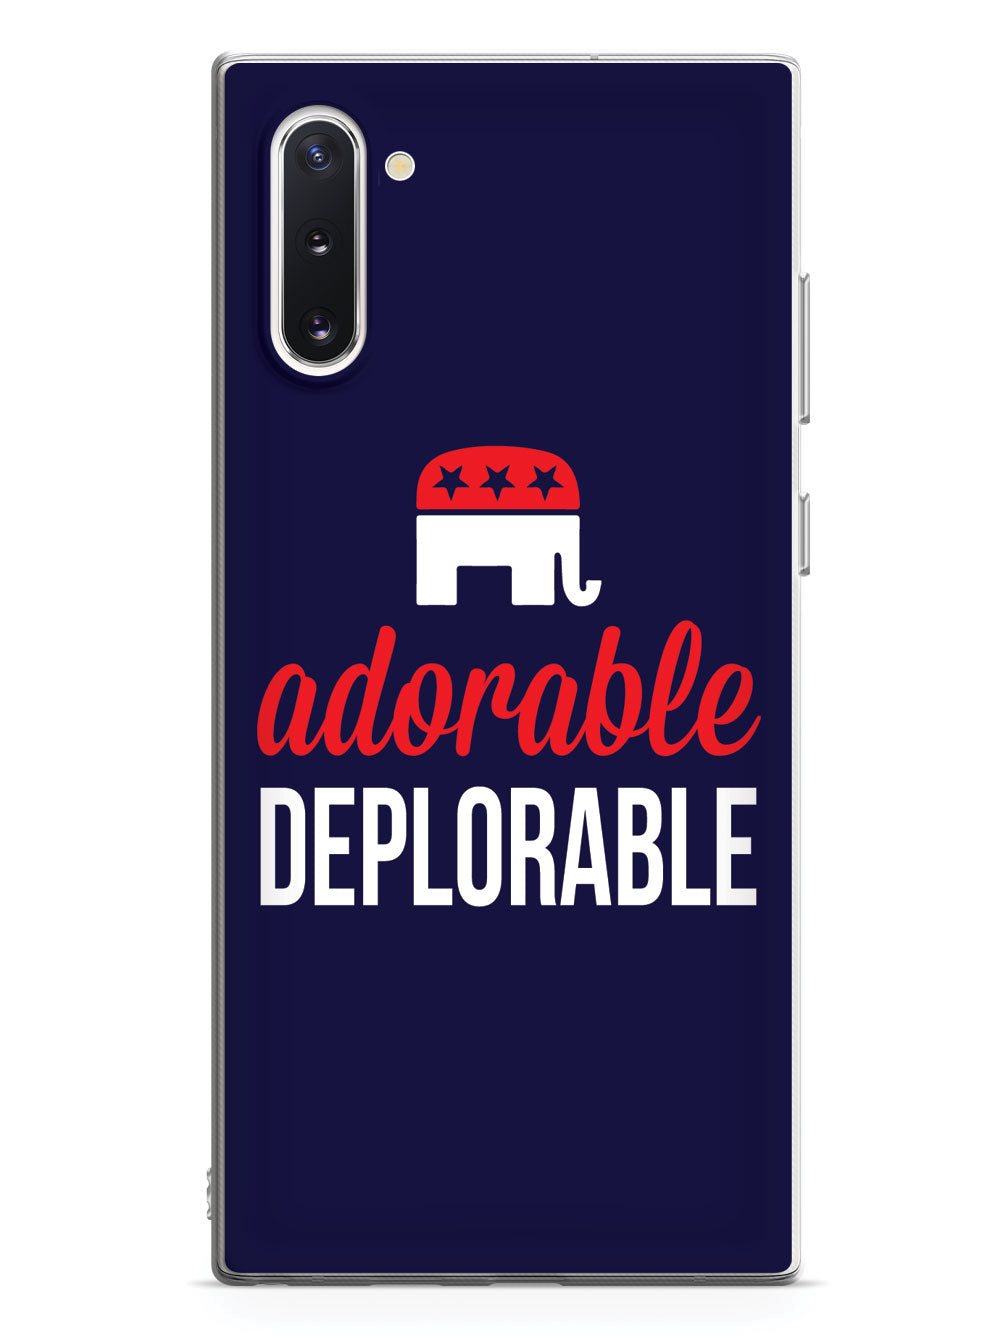 Adorable Deplorable - Red, White, and Blue Case